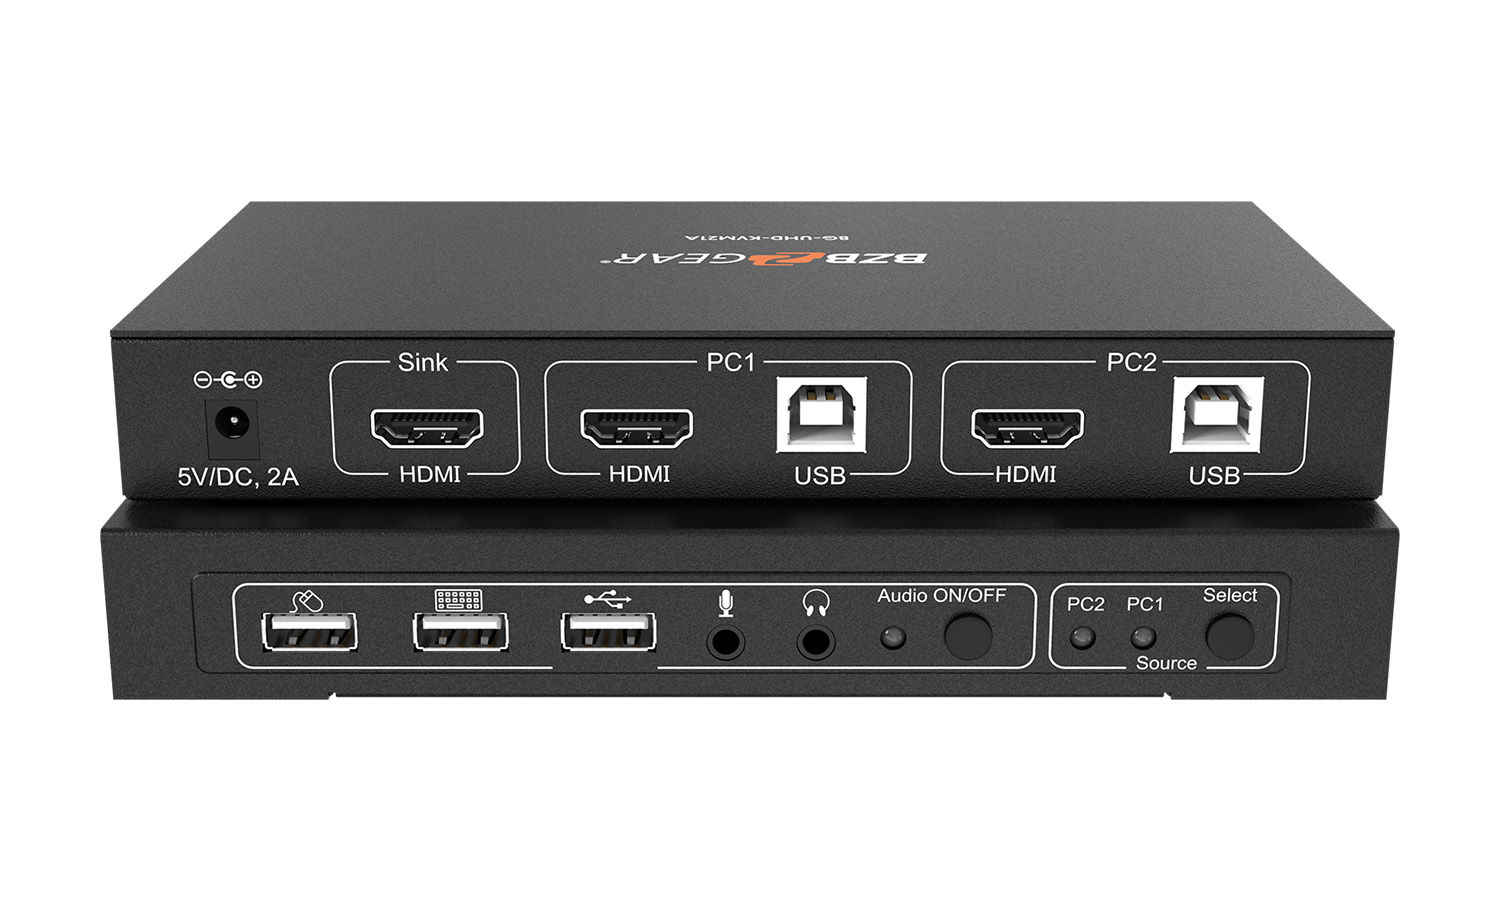 BG-UHD-KVM21A 2x1 4K UHD KVM Switcher with USB 2.0 Ports for Peripherals and Audio Support by BZBGEAR